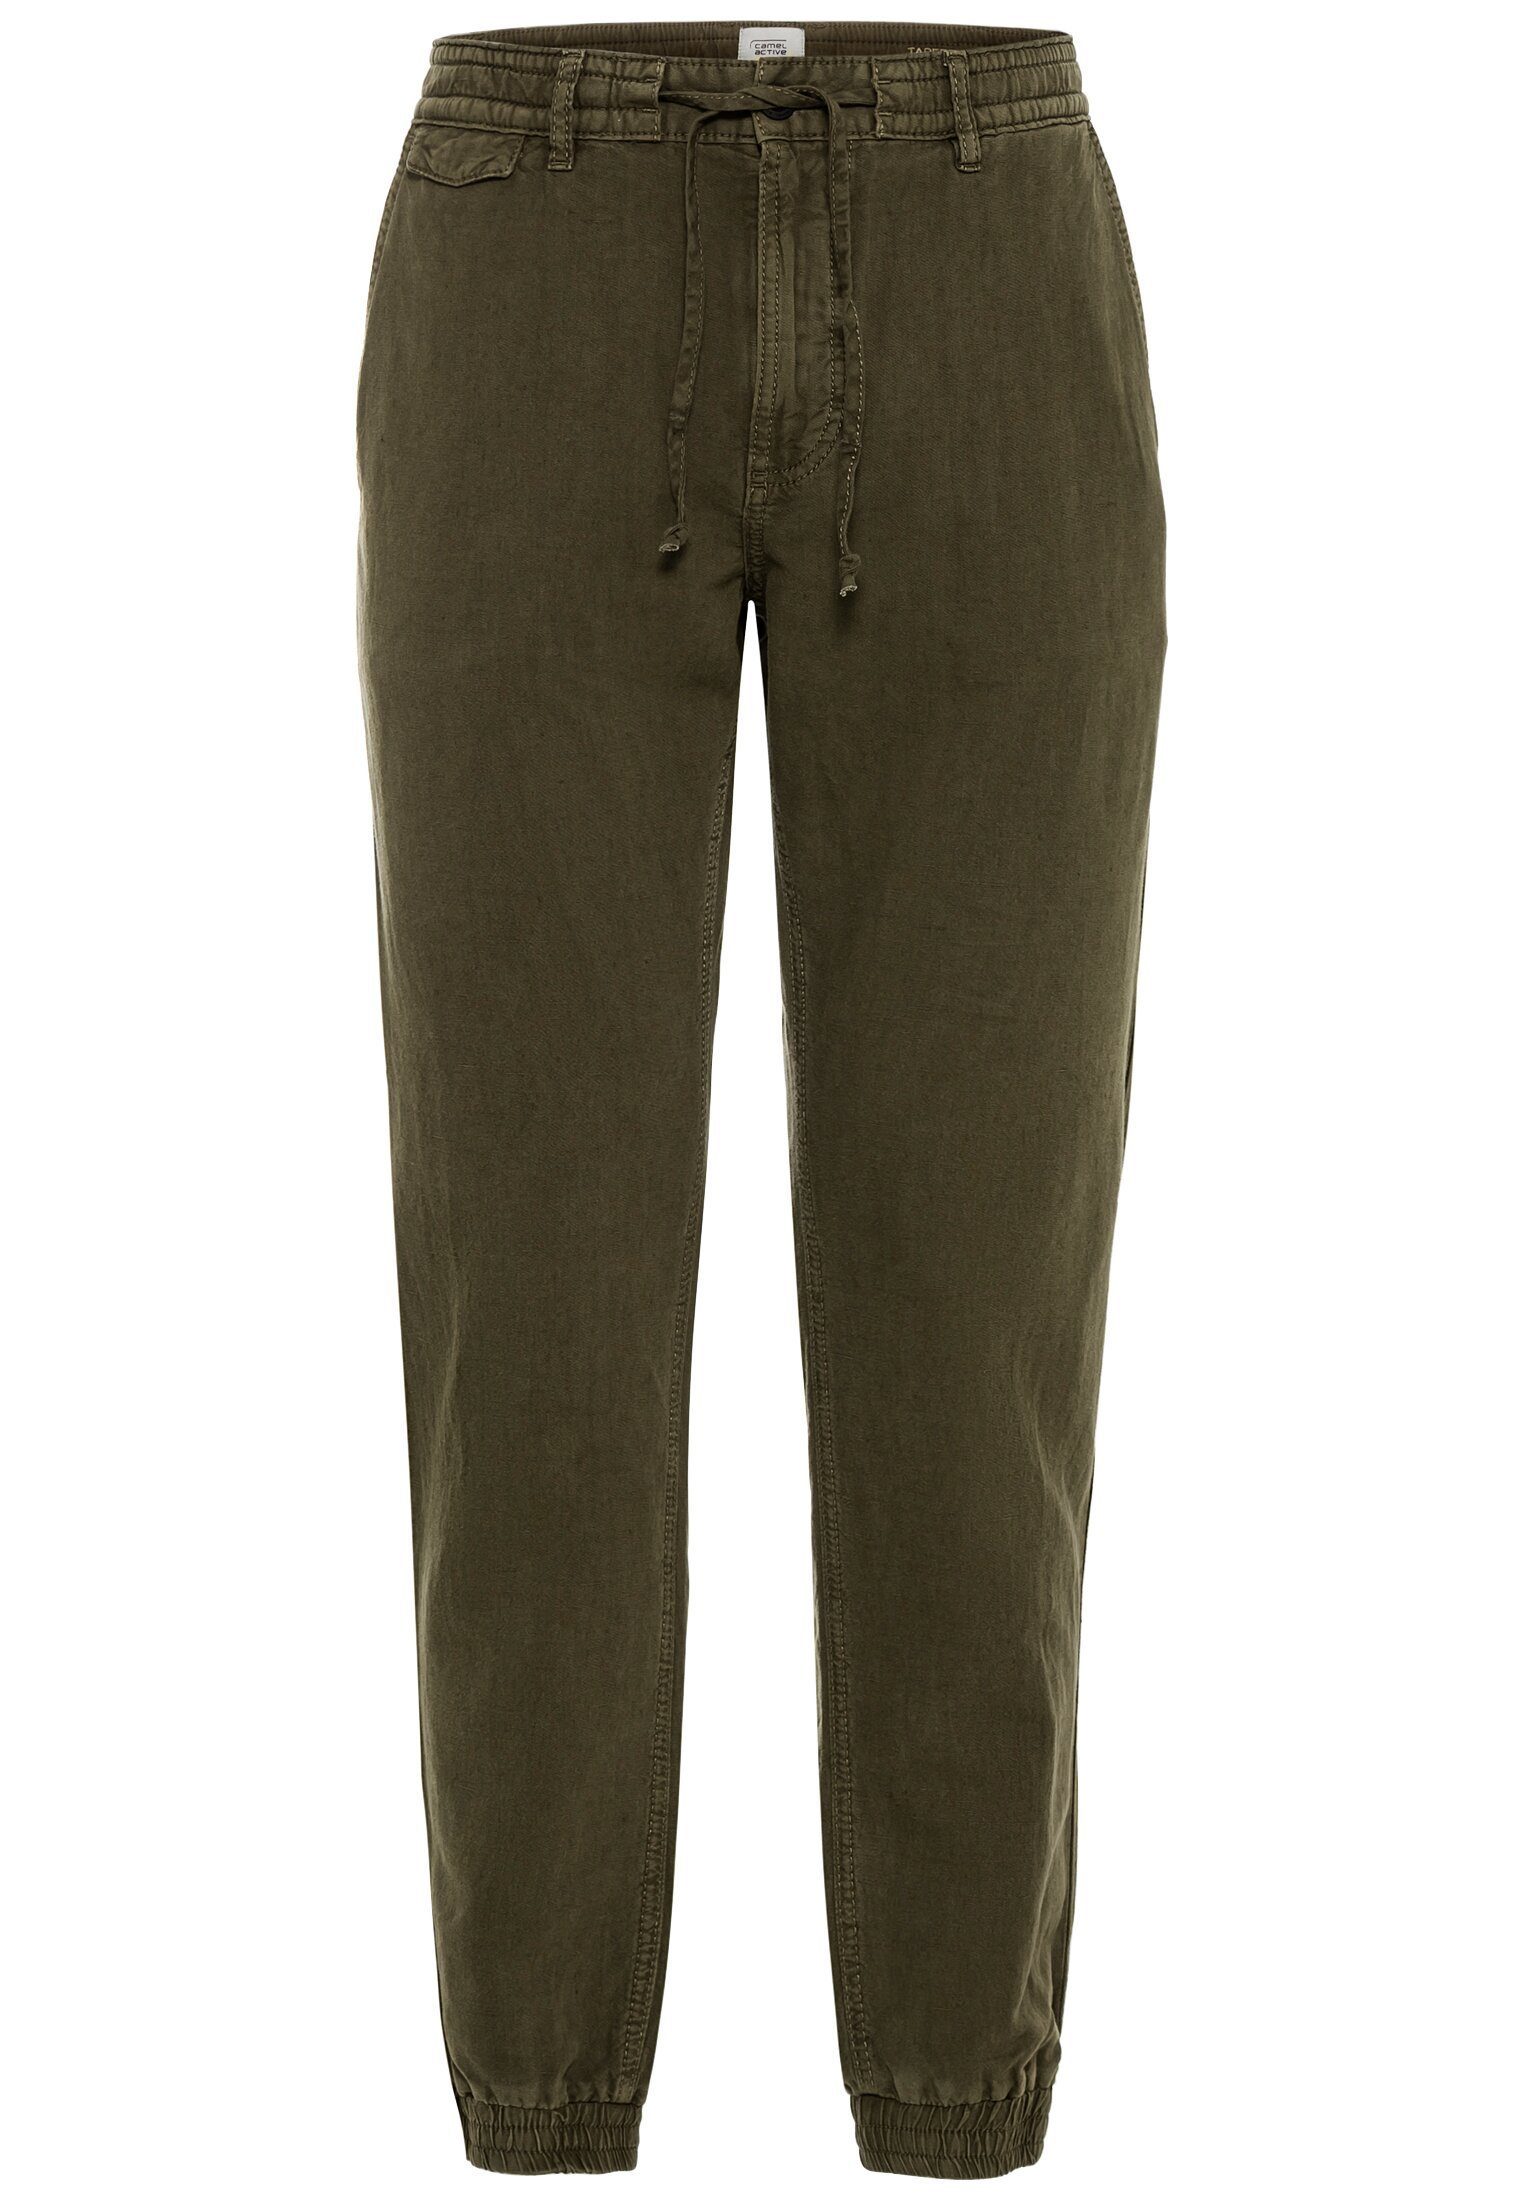 camel active Chinohose camel active Chino Herren Tapered Fit